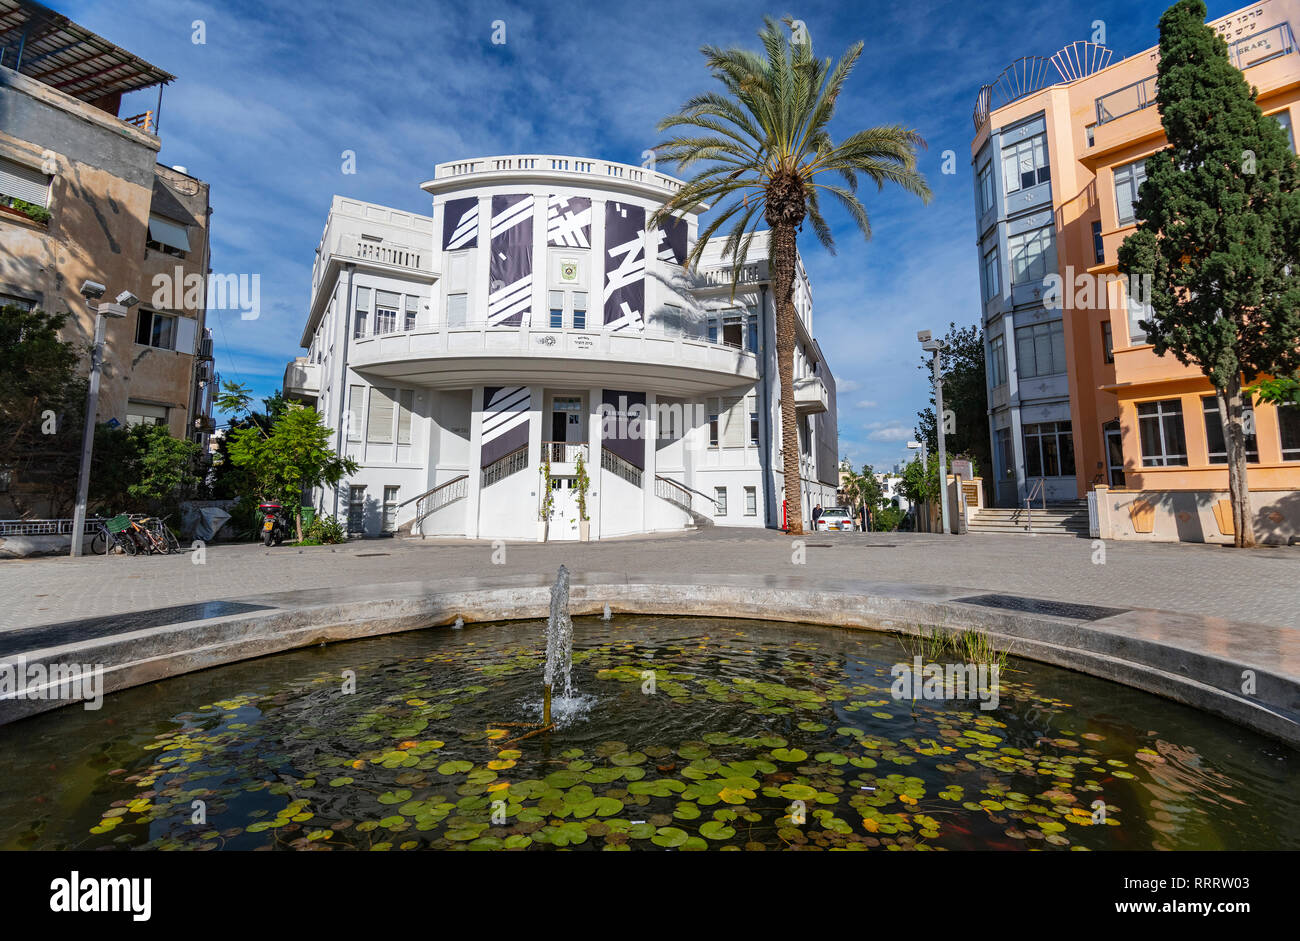 The recently restored Beit Ha’ir museum and cultural centre, Bialik Square, Tel Aviv Stock Photo